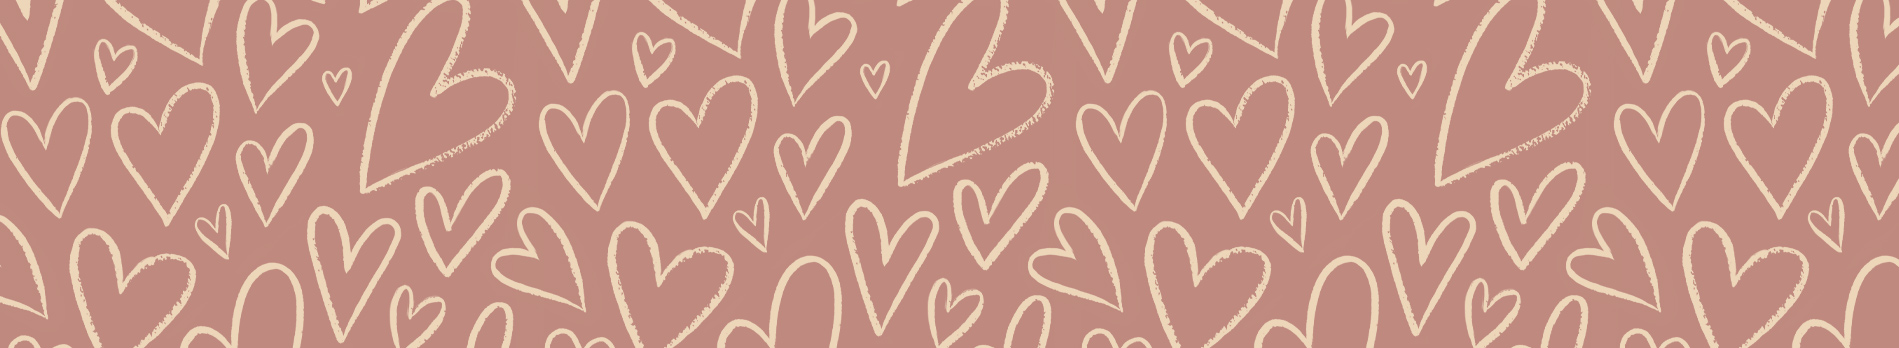 A repeating pattern of heart line drawings on a mauve background.